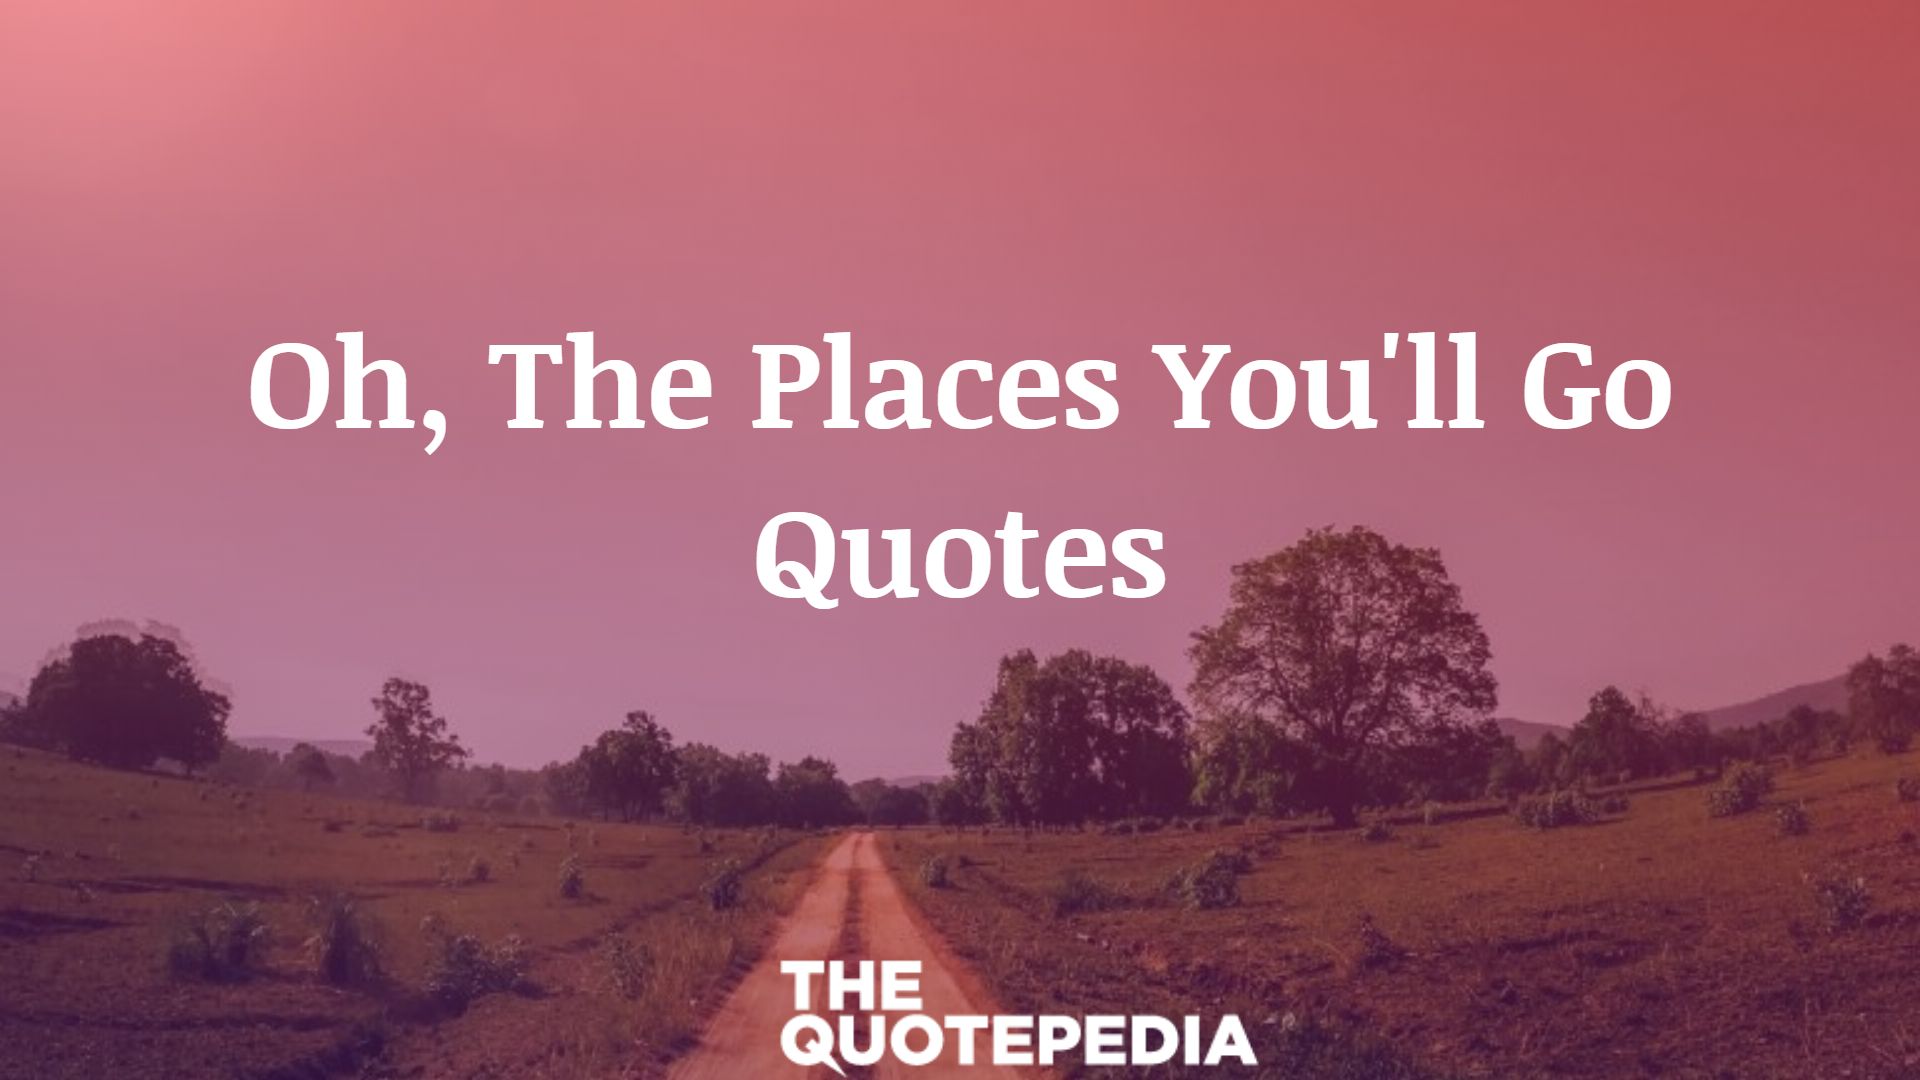 Oh, The Places You'll Go Quotes